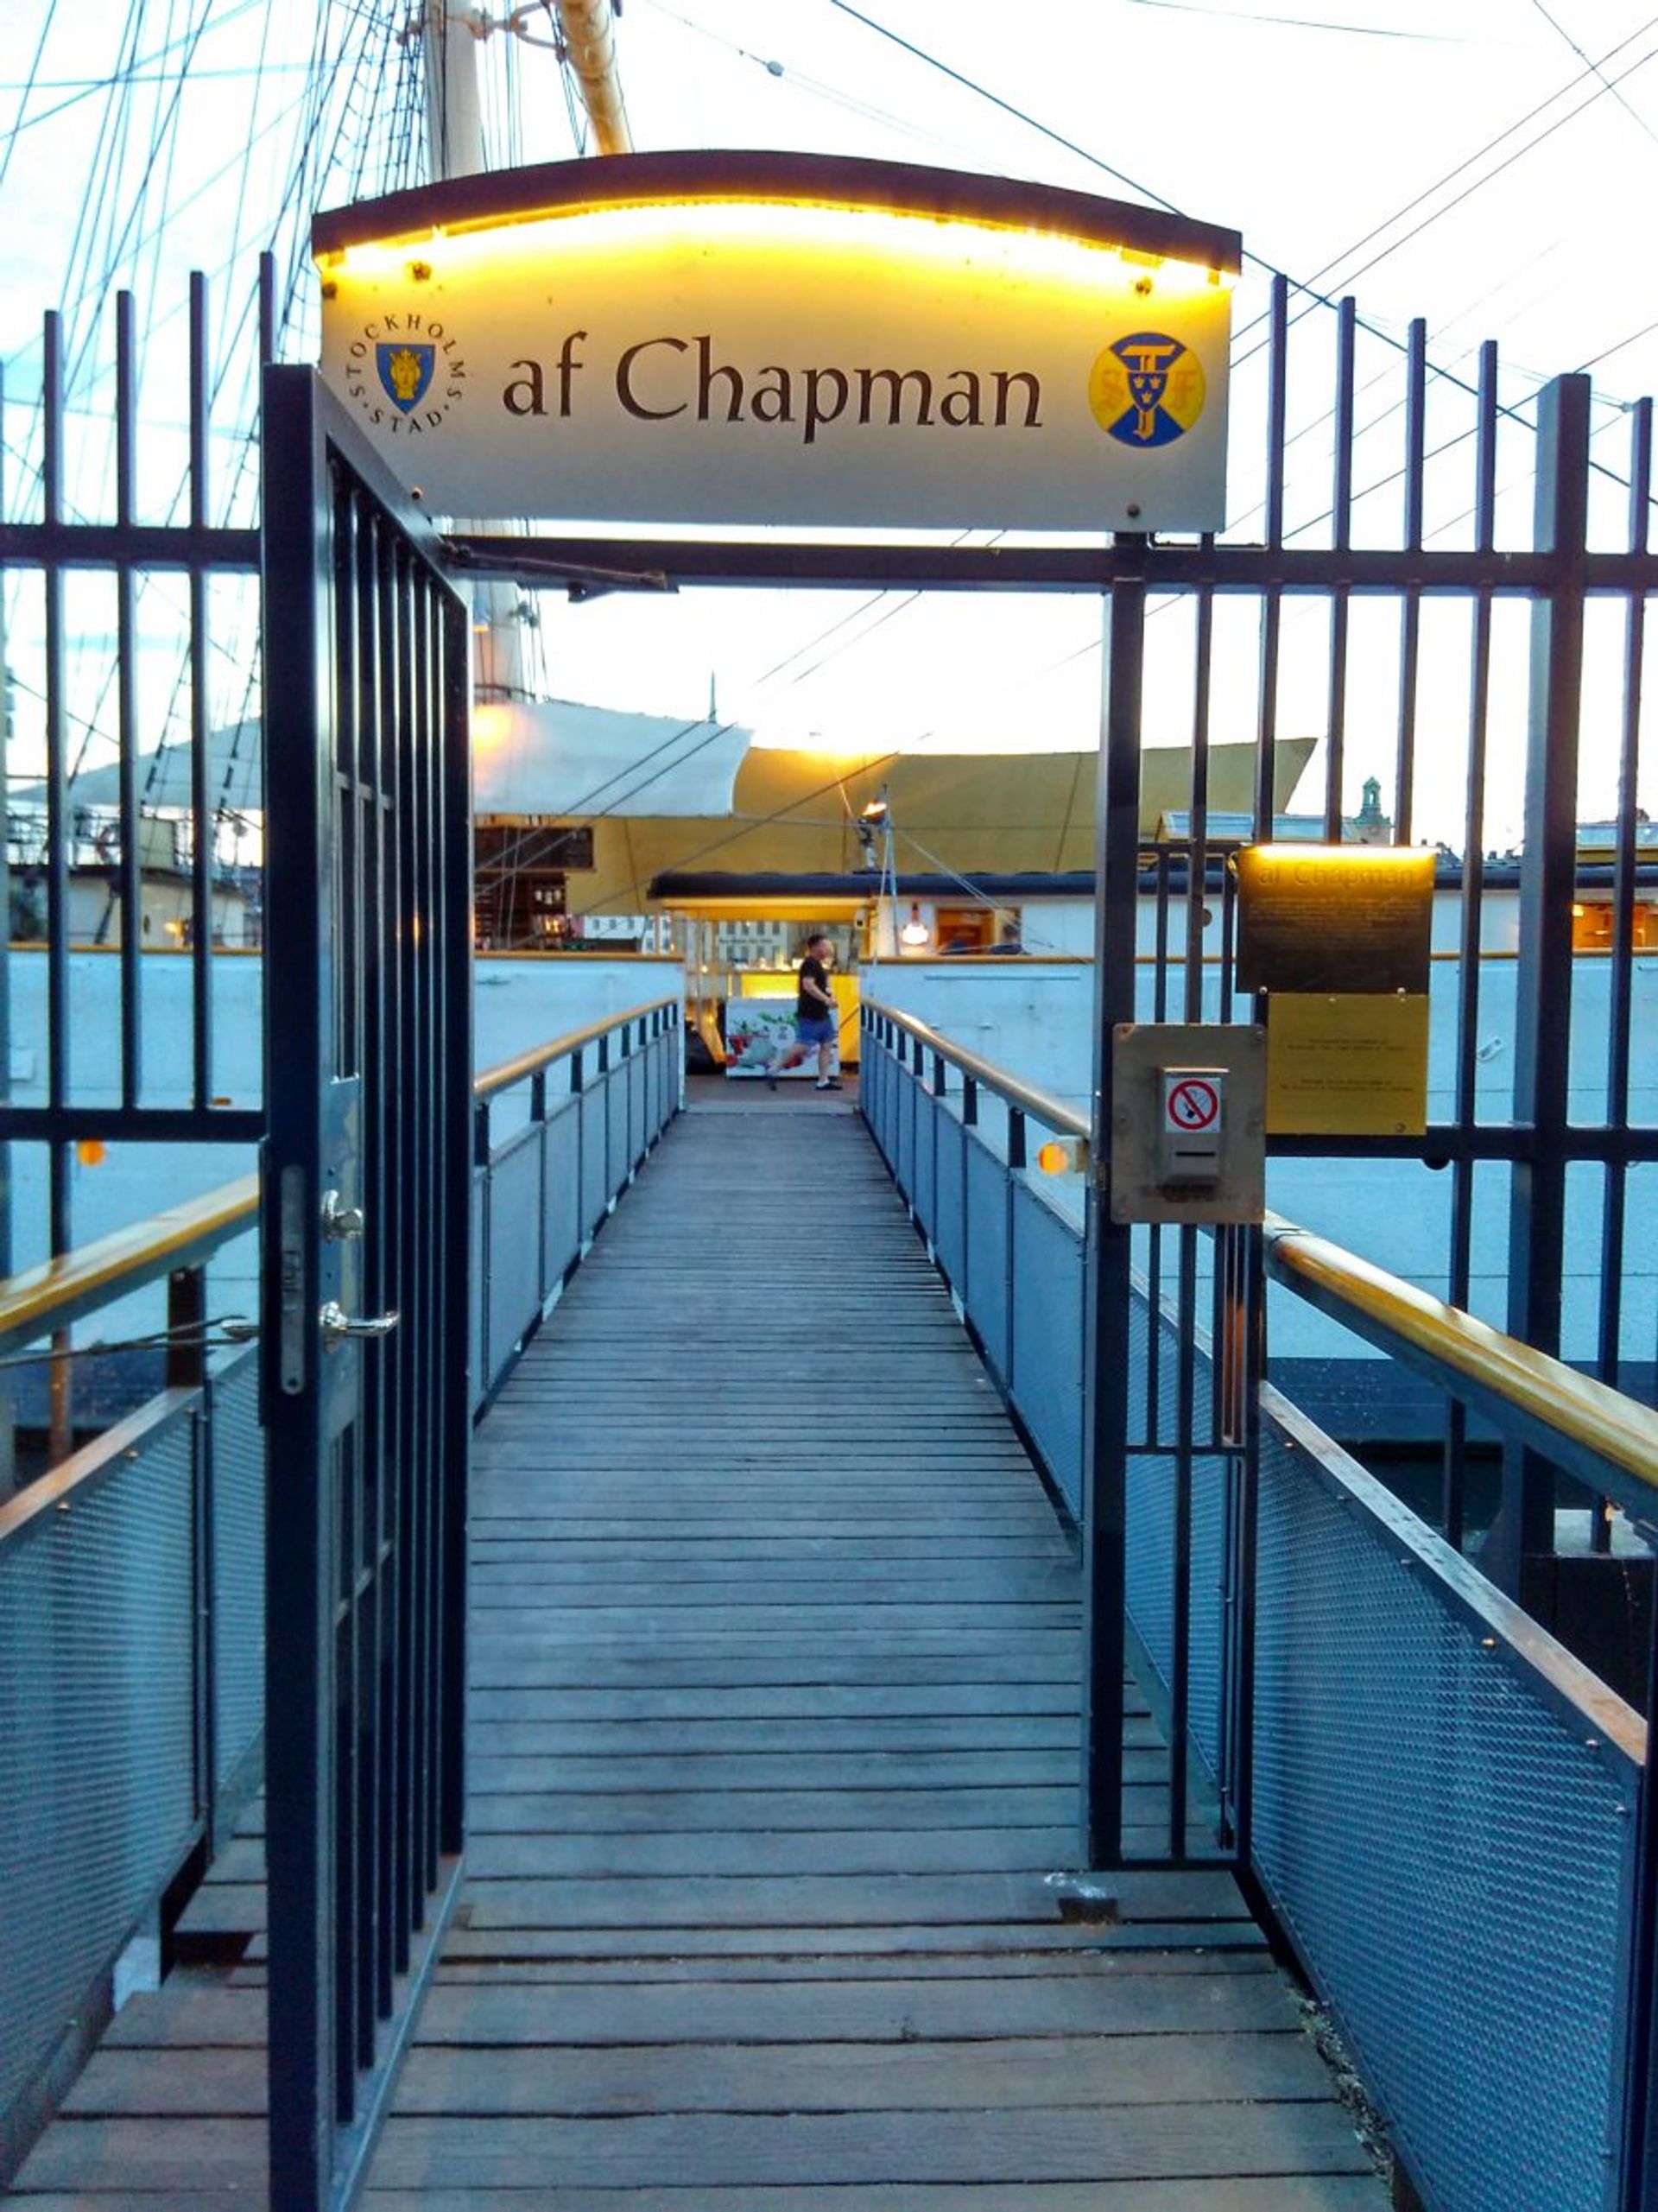 welcome to af Chapman